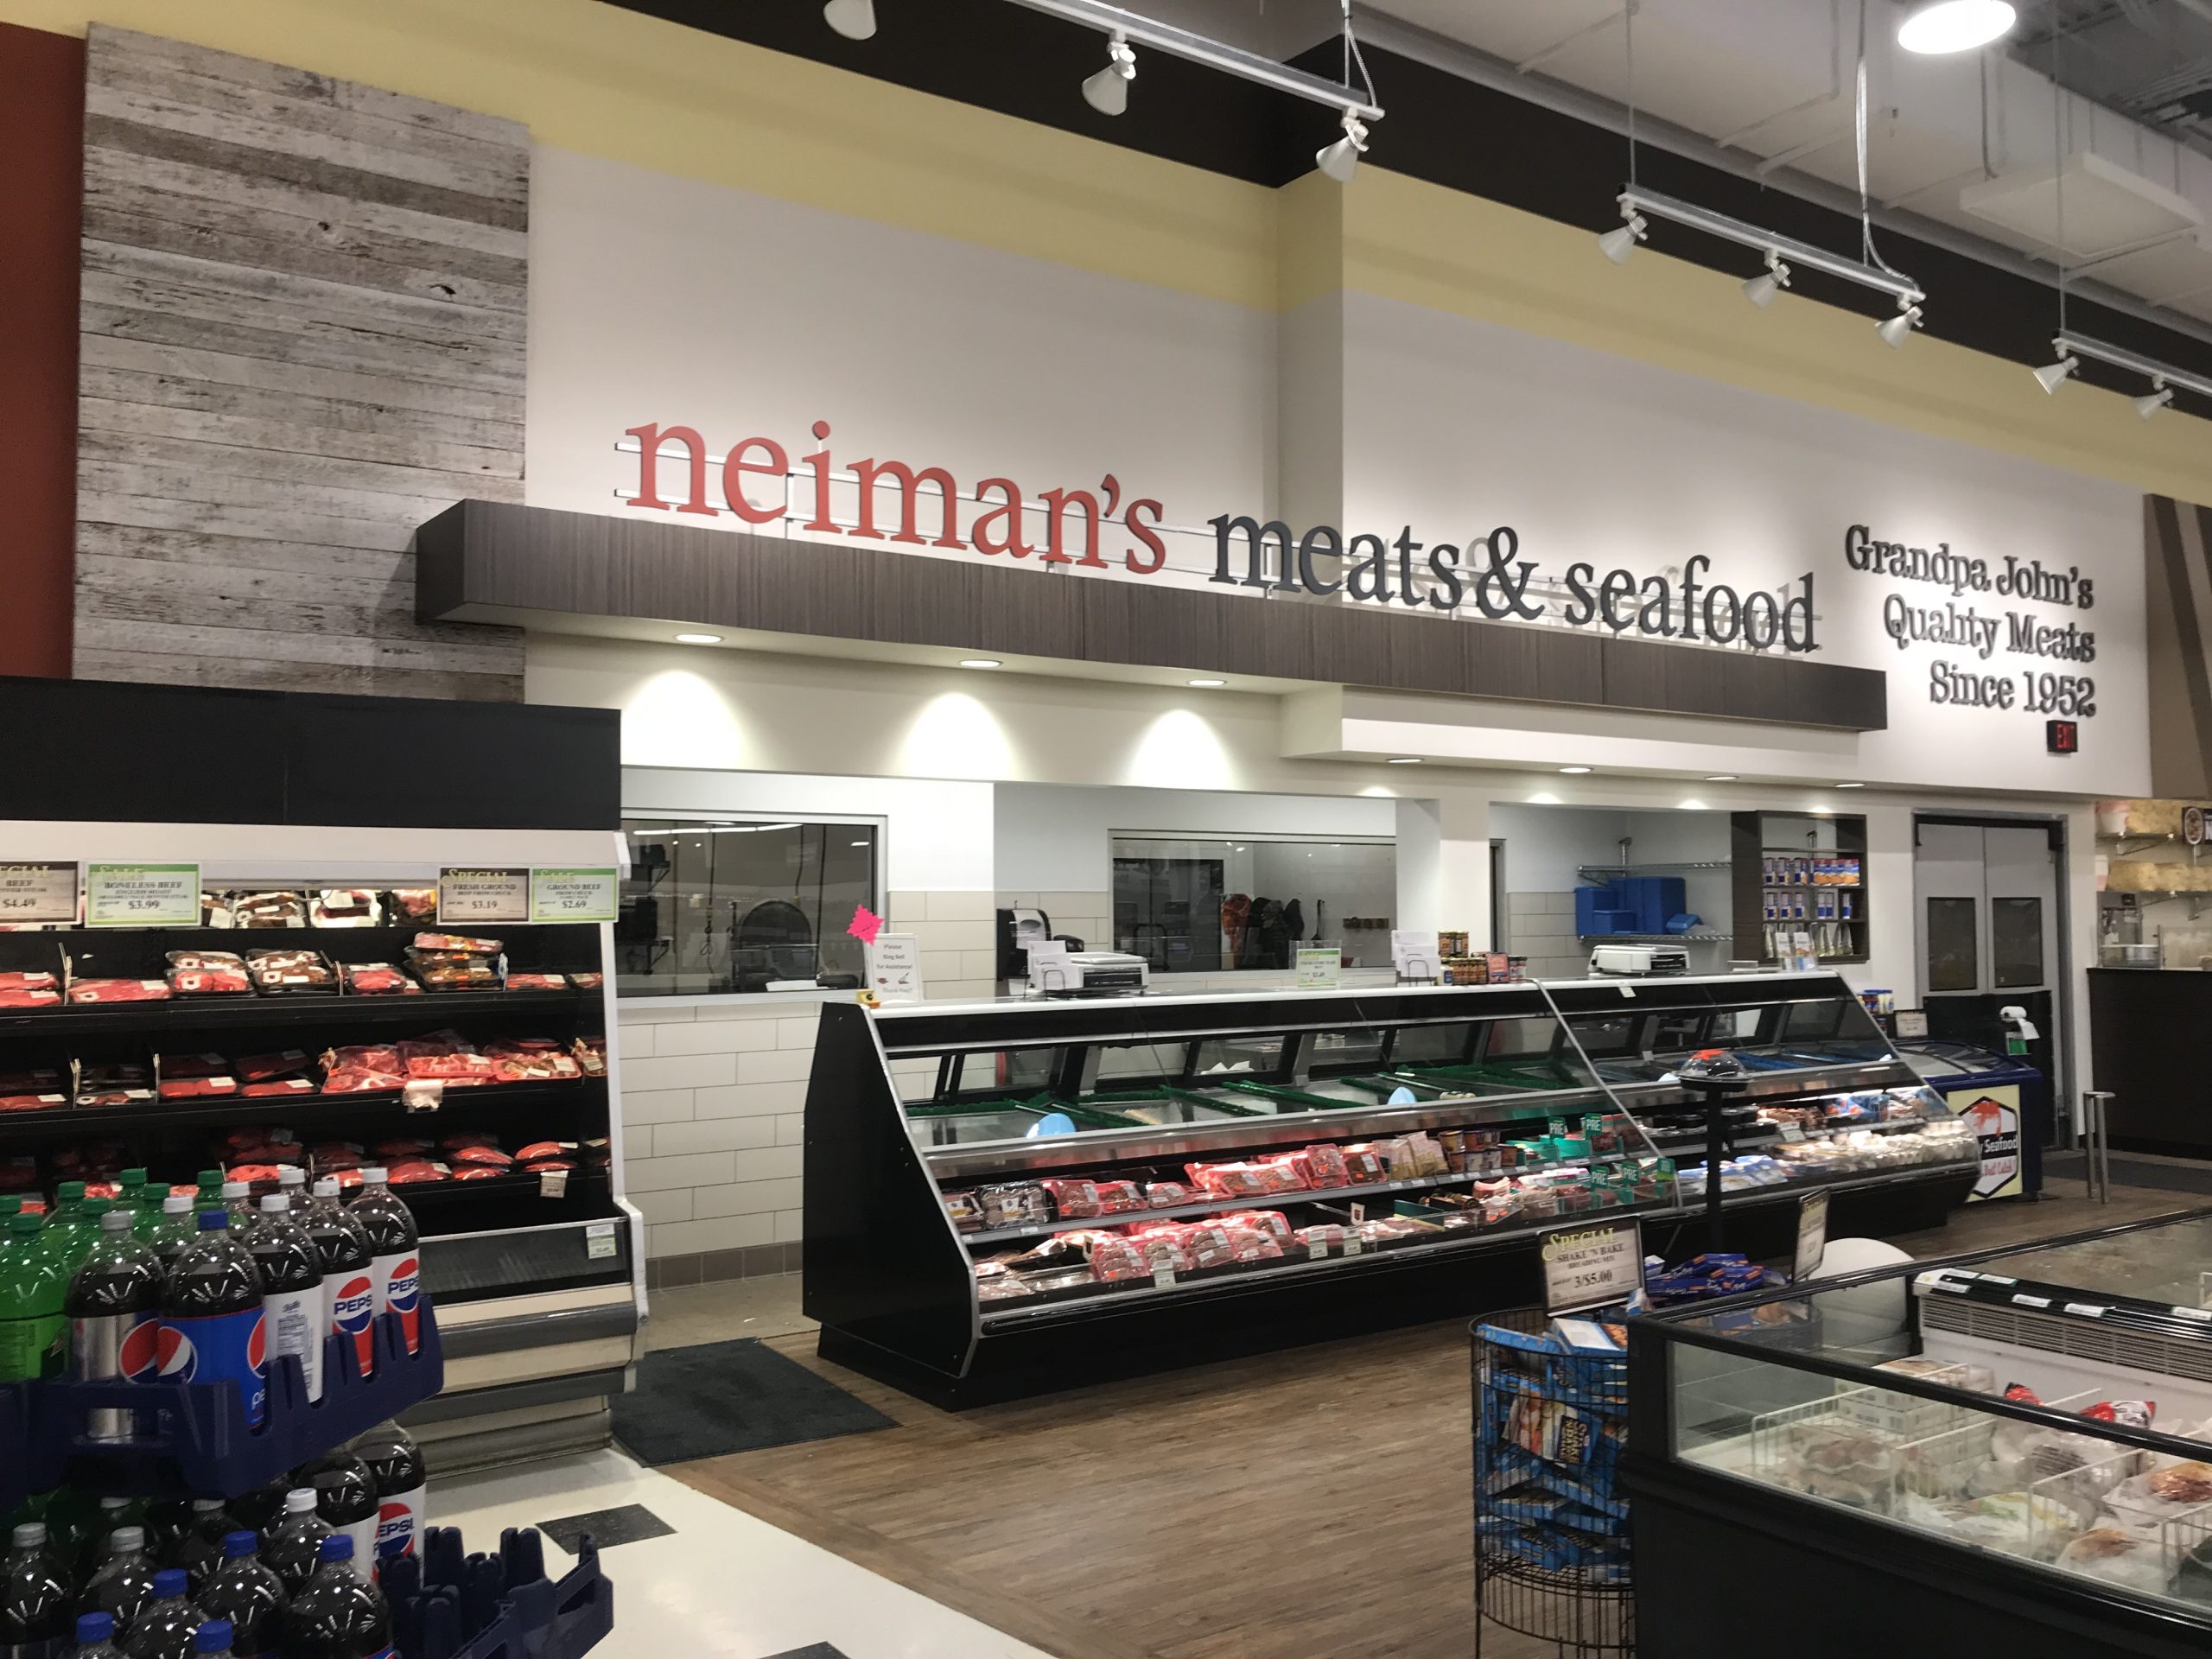 StoreMasters highlights the prepared foods, hot meals, and deli with signage that encourages families eating together